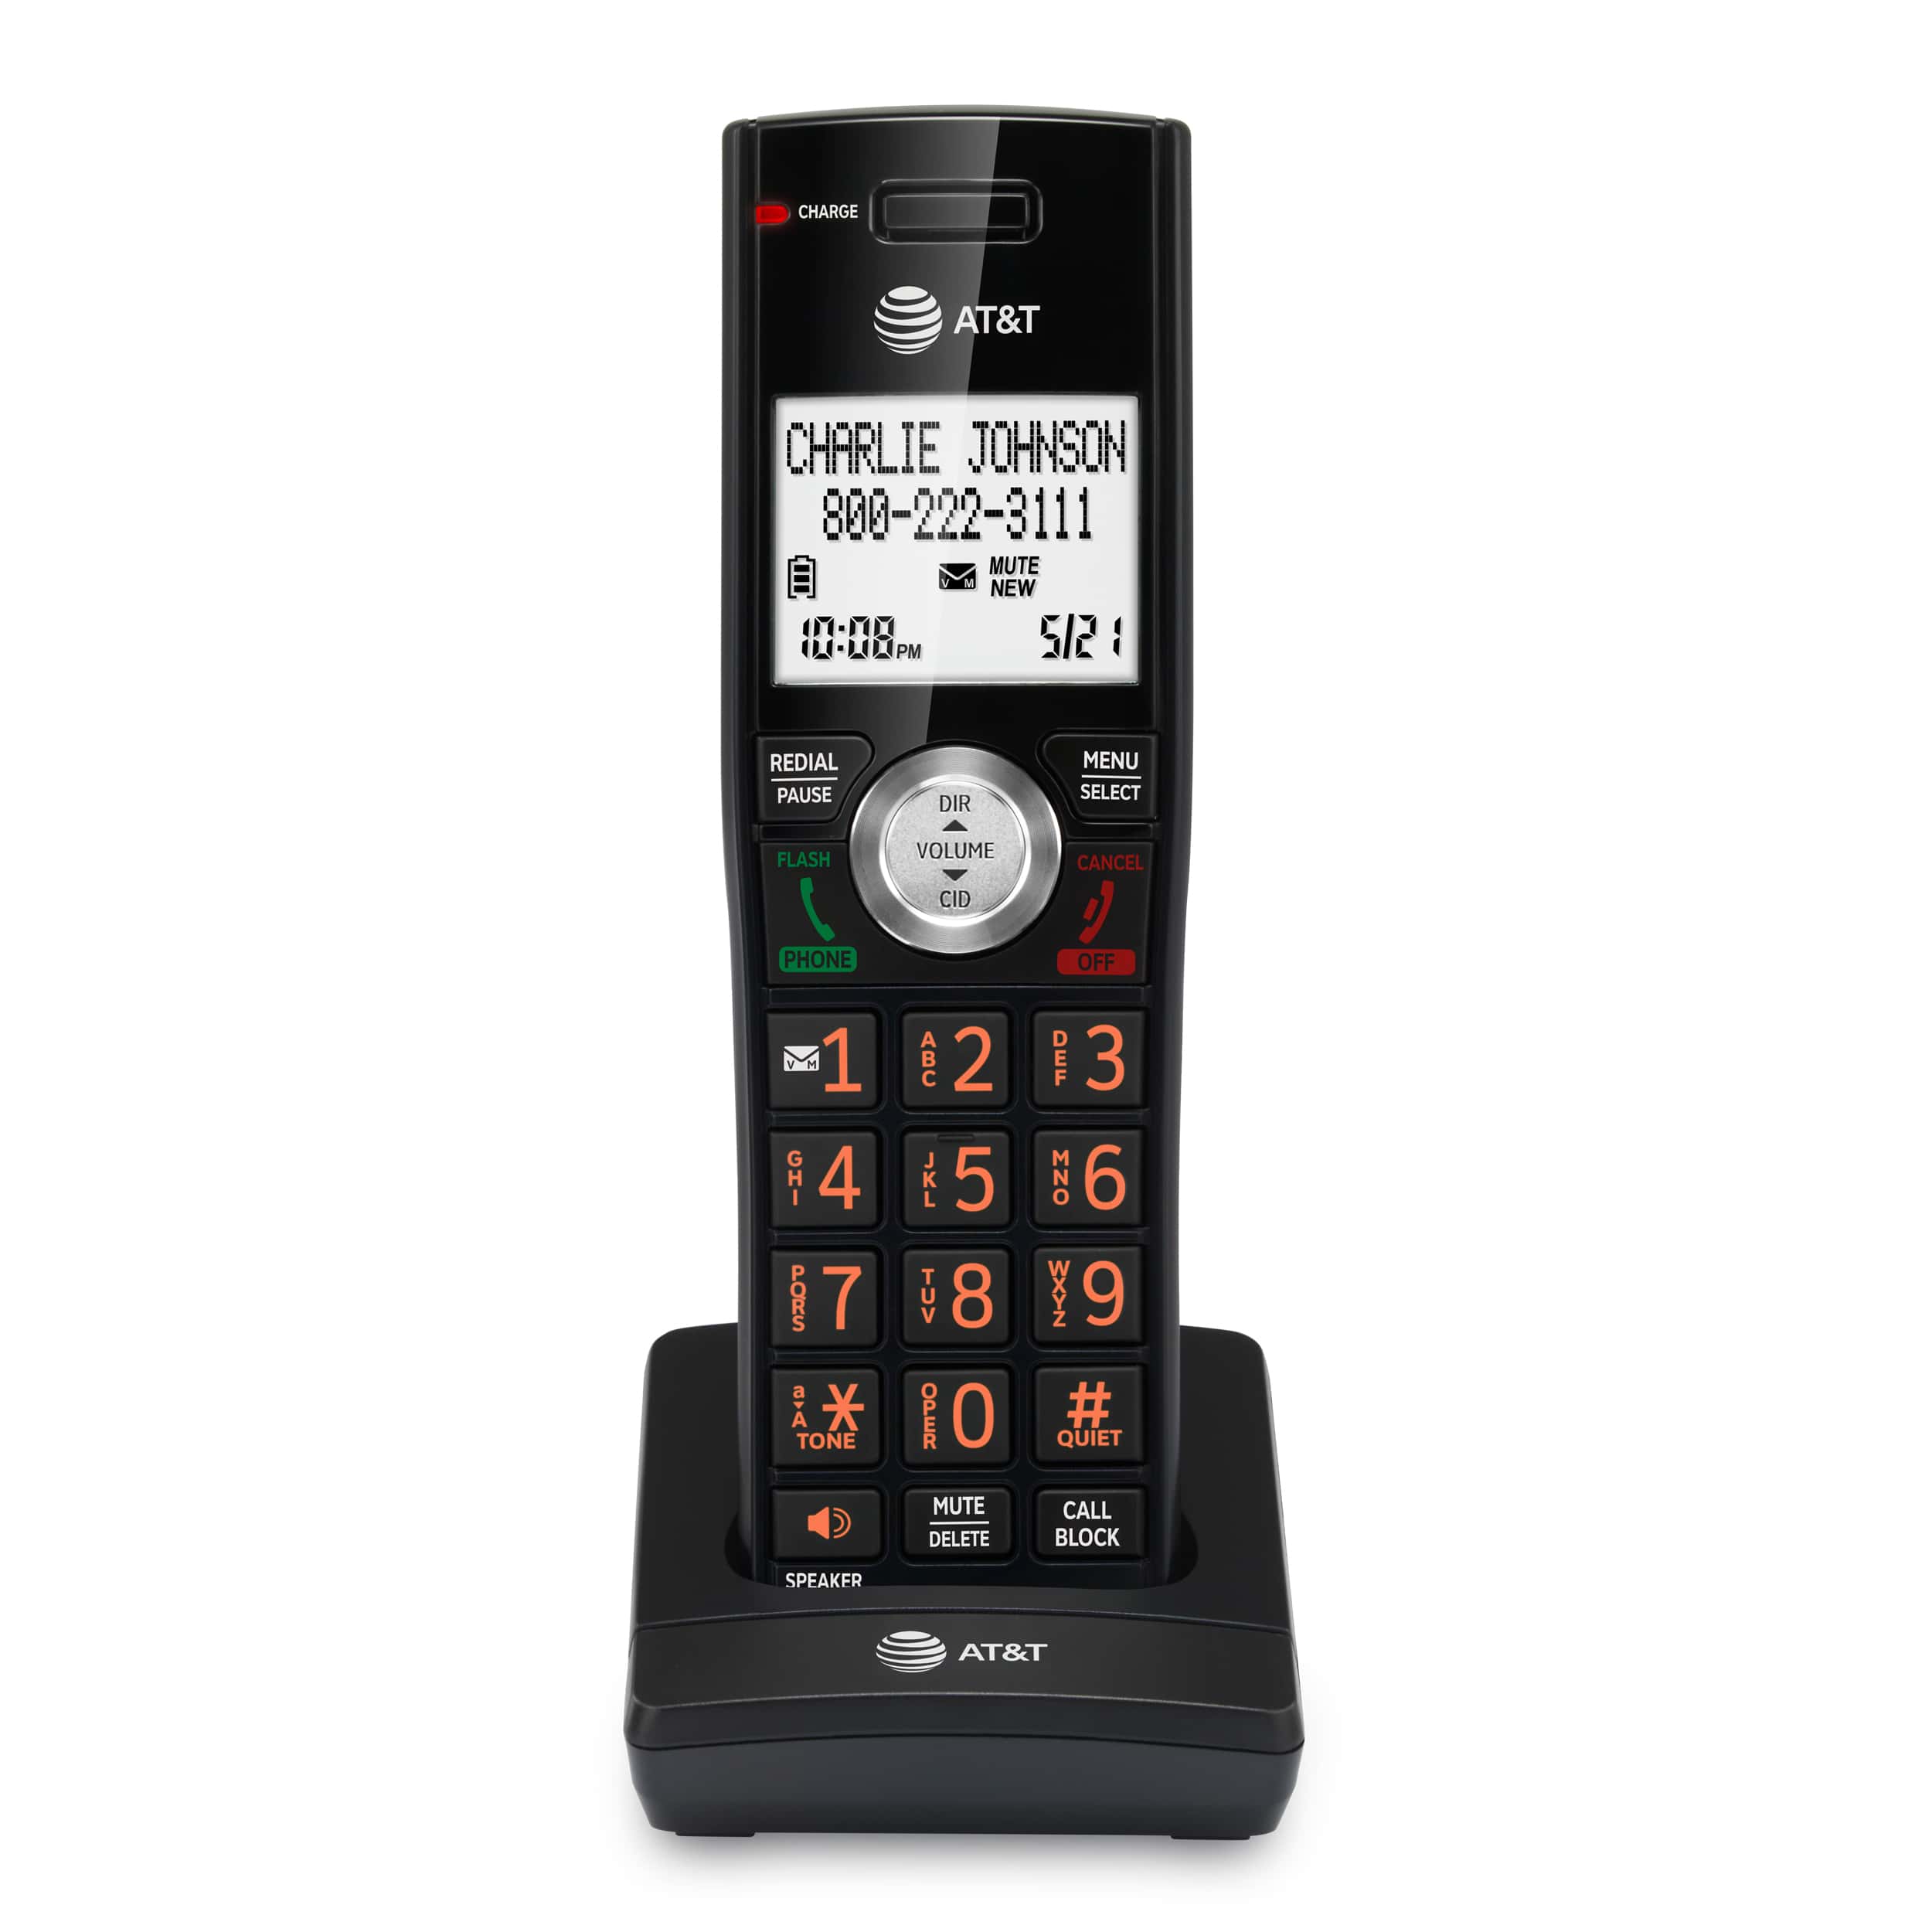 Cordless Accessory Handset for AT&T CL82207, CL82267, CL82307, CL82367, CL82407, CL83207, CL83407, CL84107, CL84207 and CL84327 - view 1